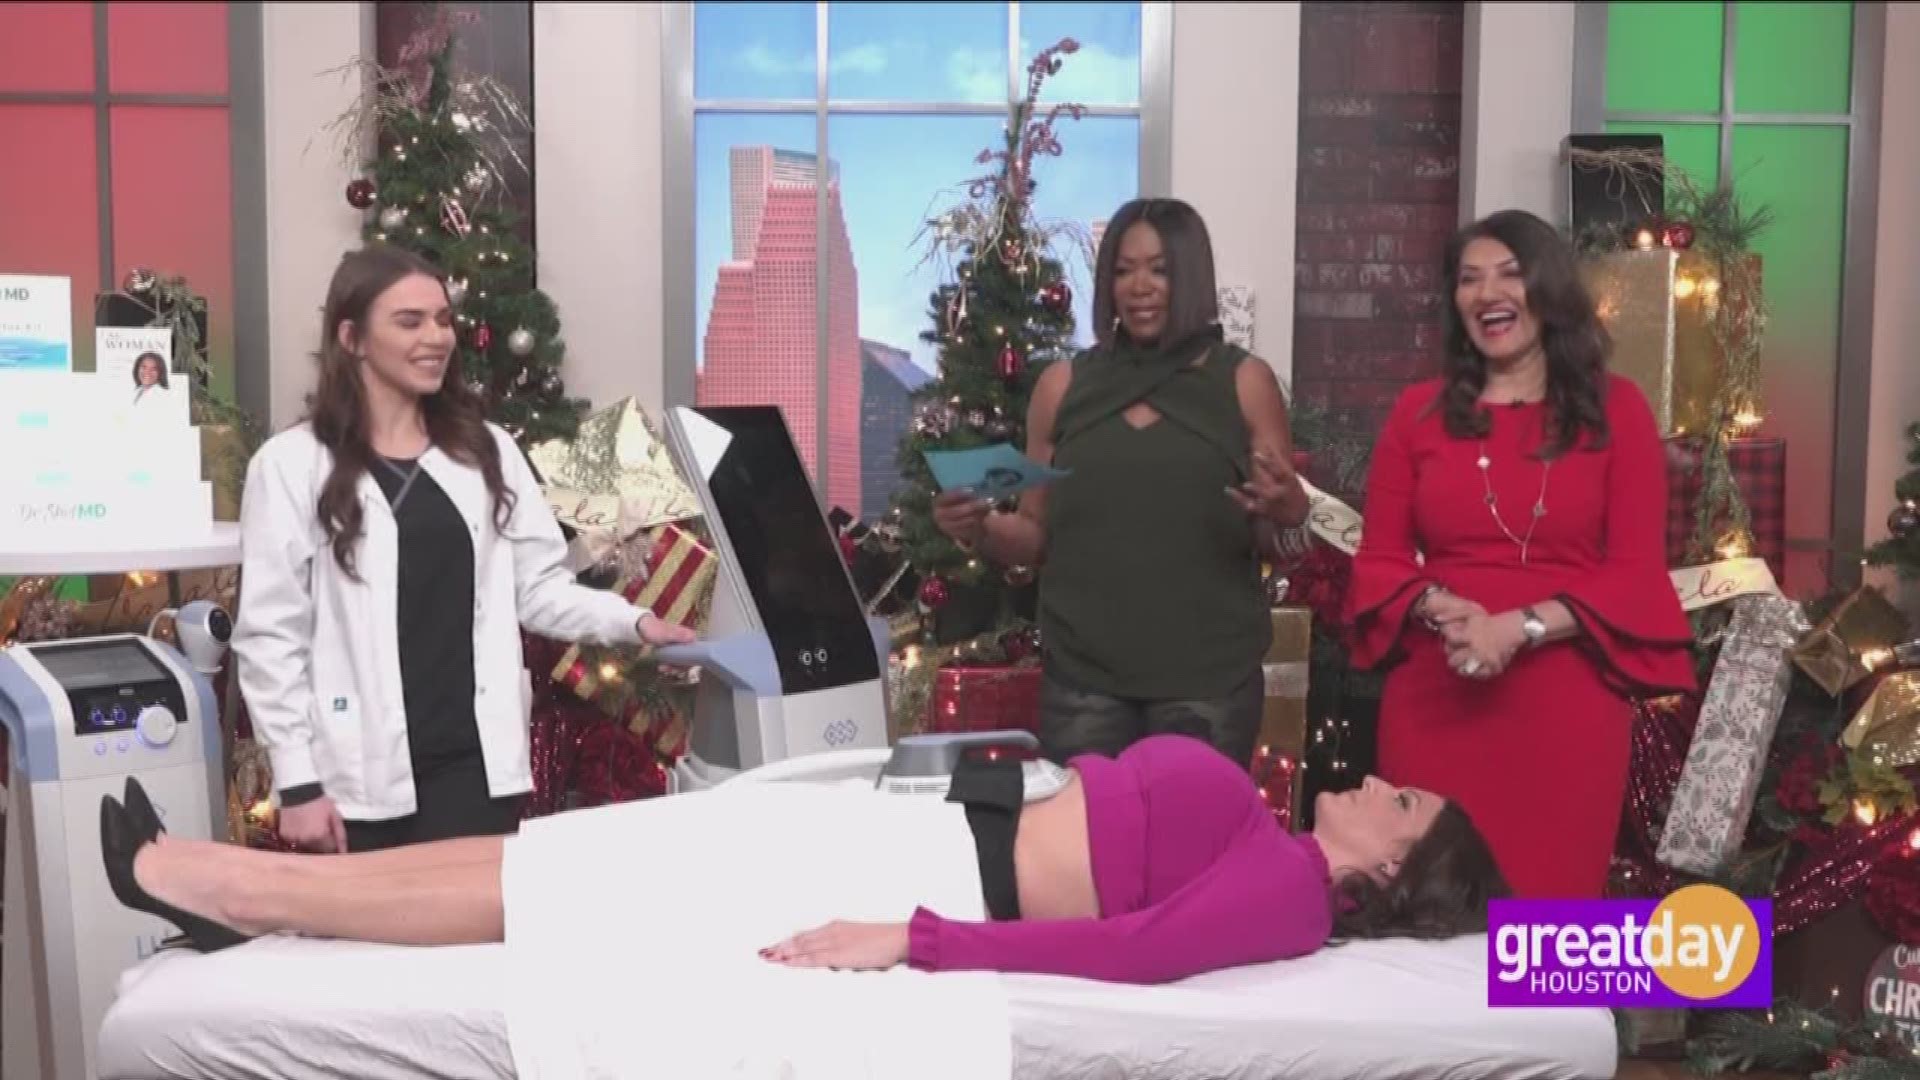 Dr. Shelena Lalji discusses the Emsculpt device that will help you sculpt your body, while Emtone will get rid of your cellulite.